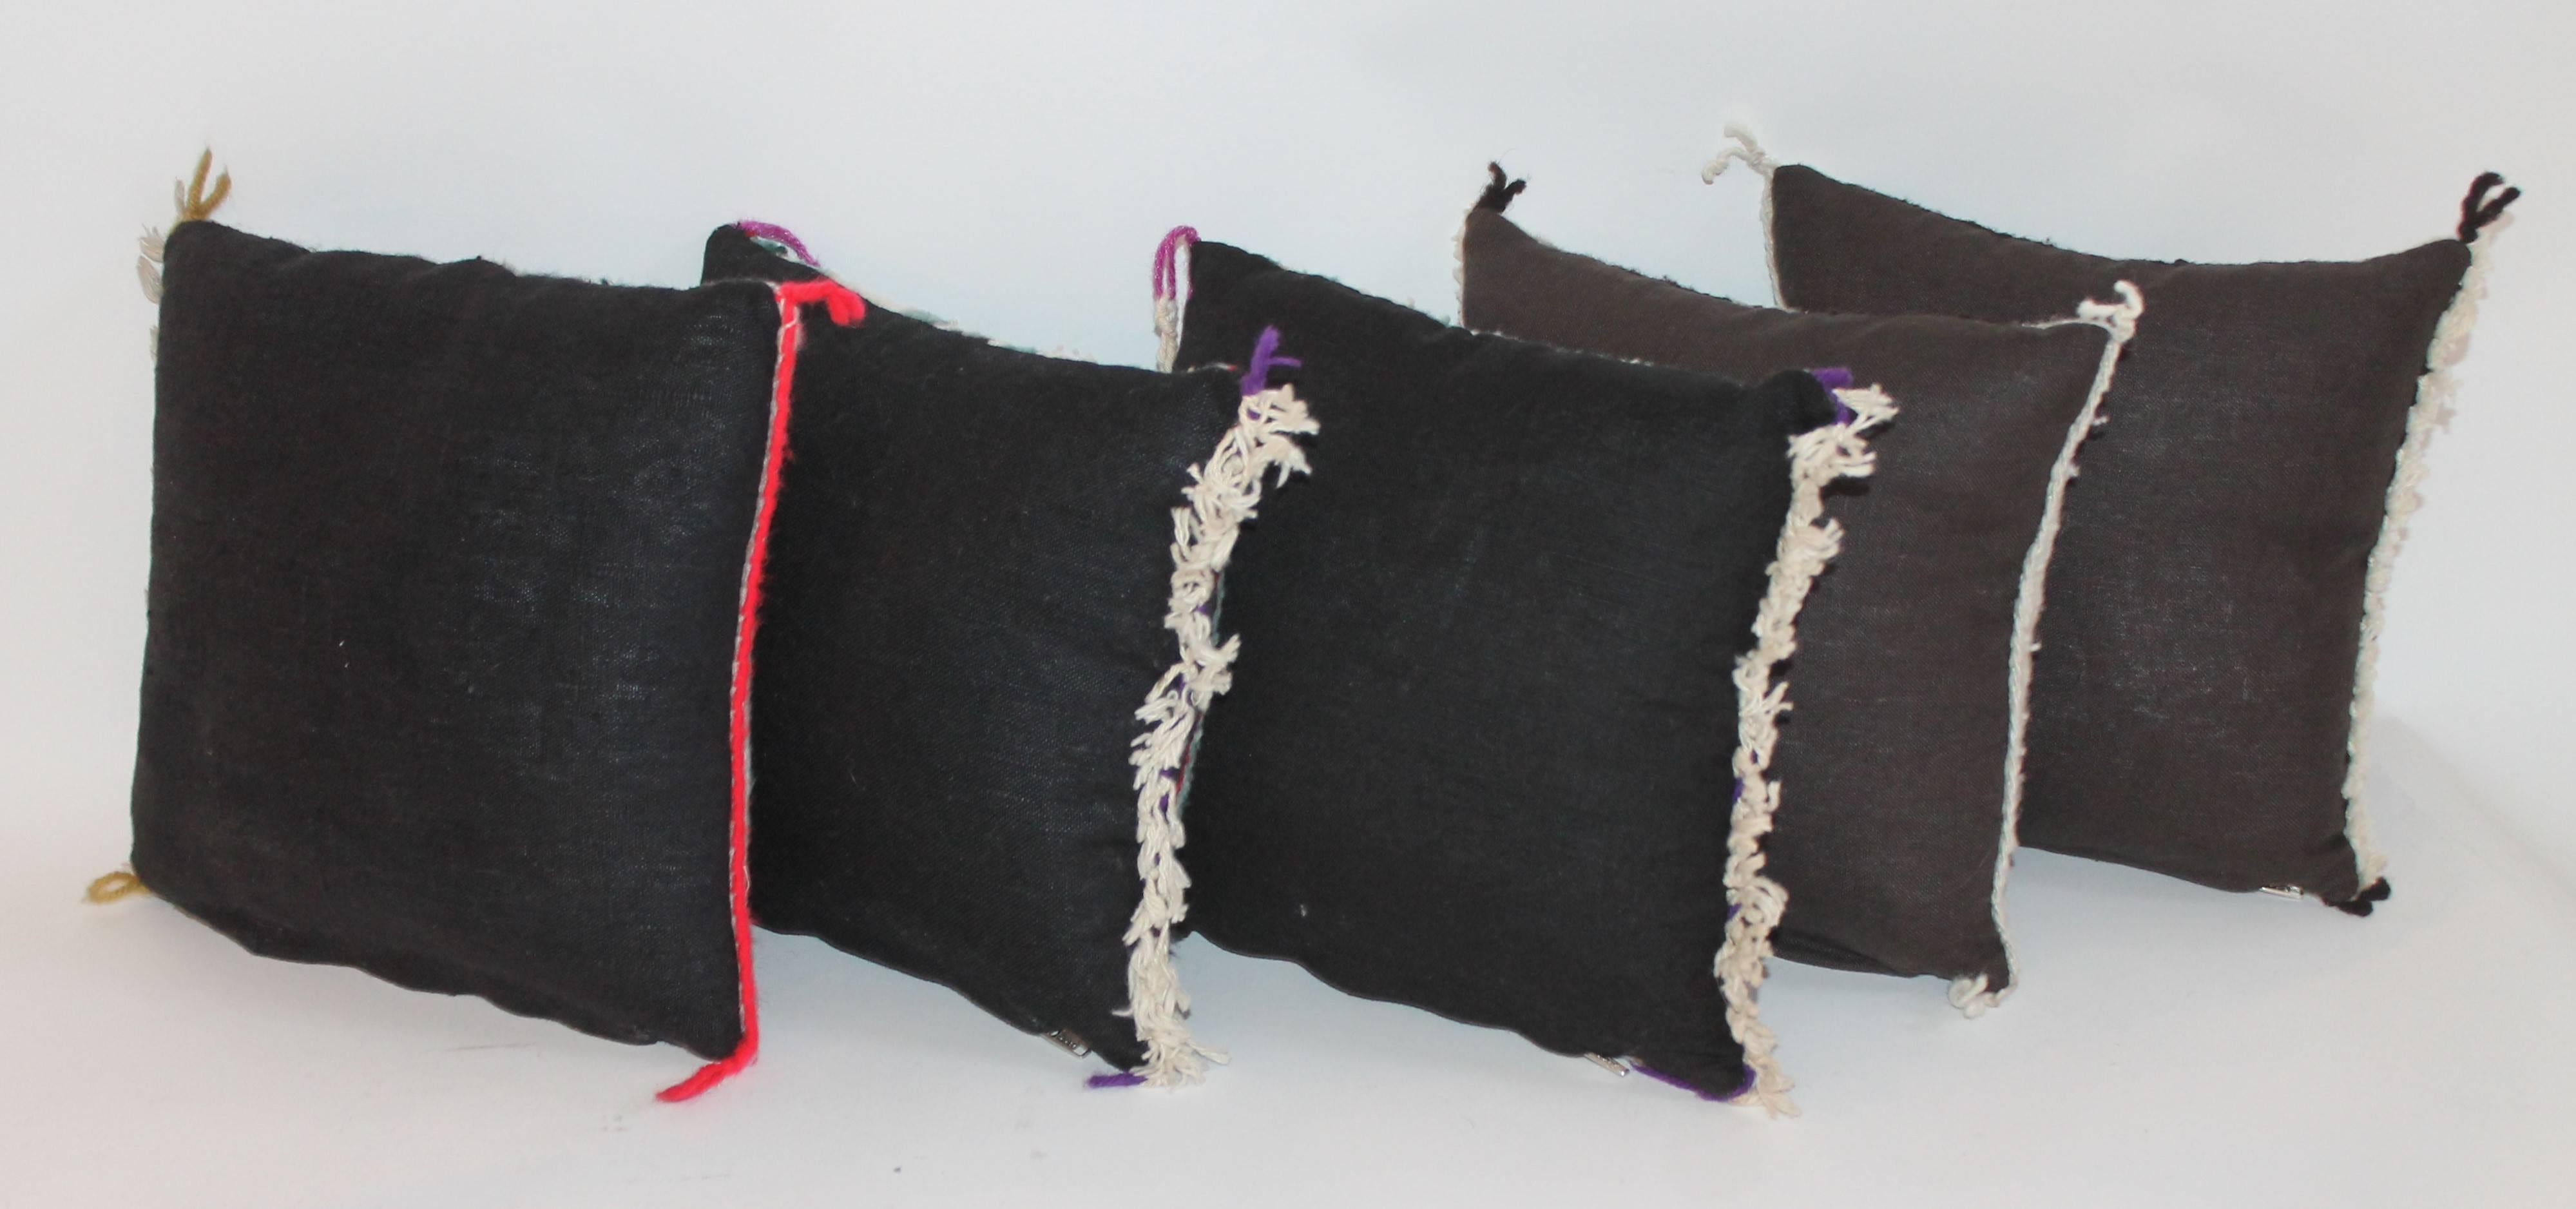 These miniature Navajo Indian weaving pillows. There are two matching pairs and one odd pattern single.

Dimensions are from left to right:
10.5